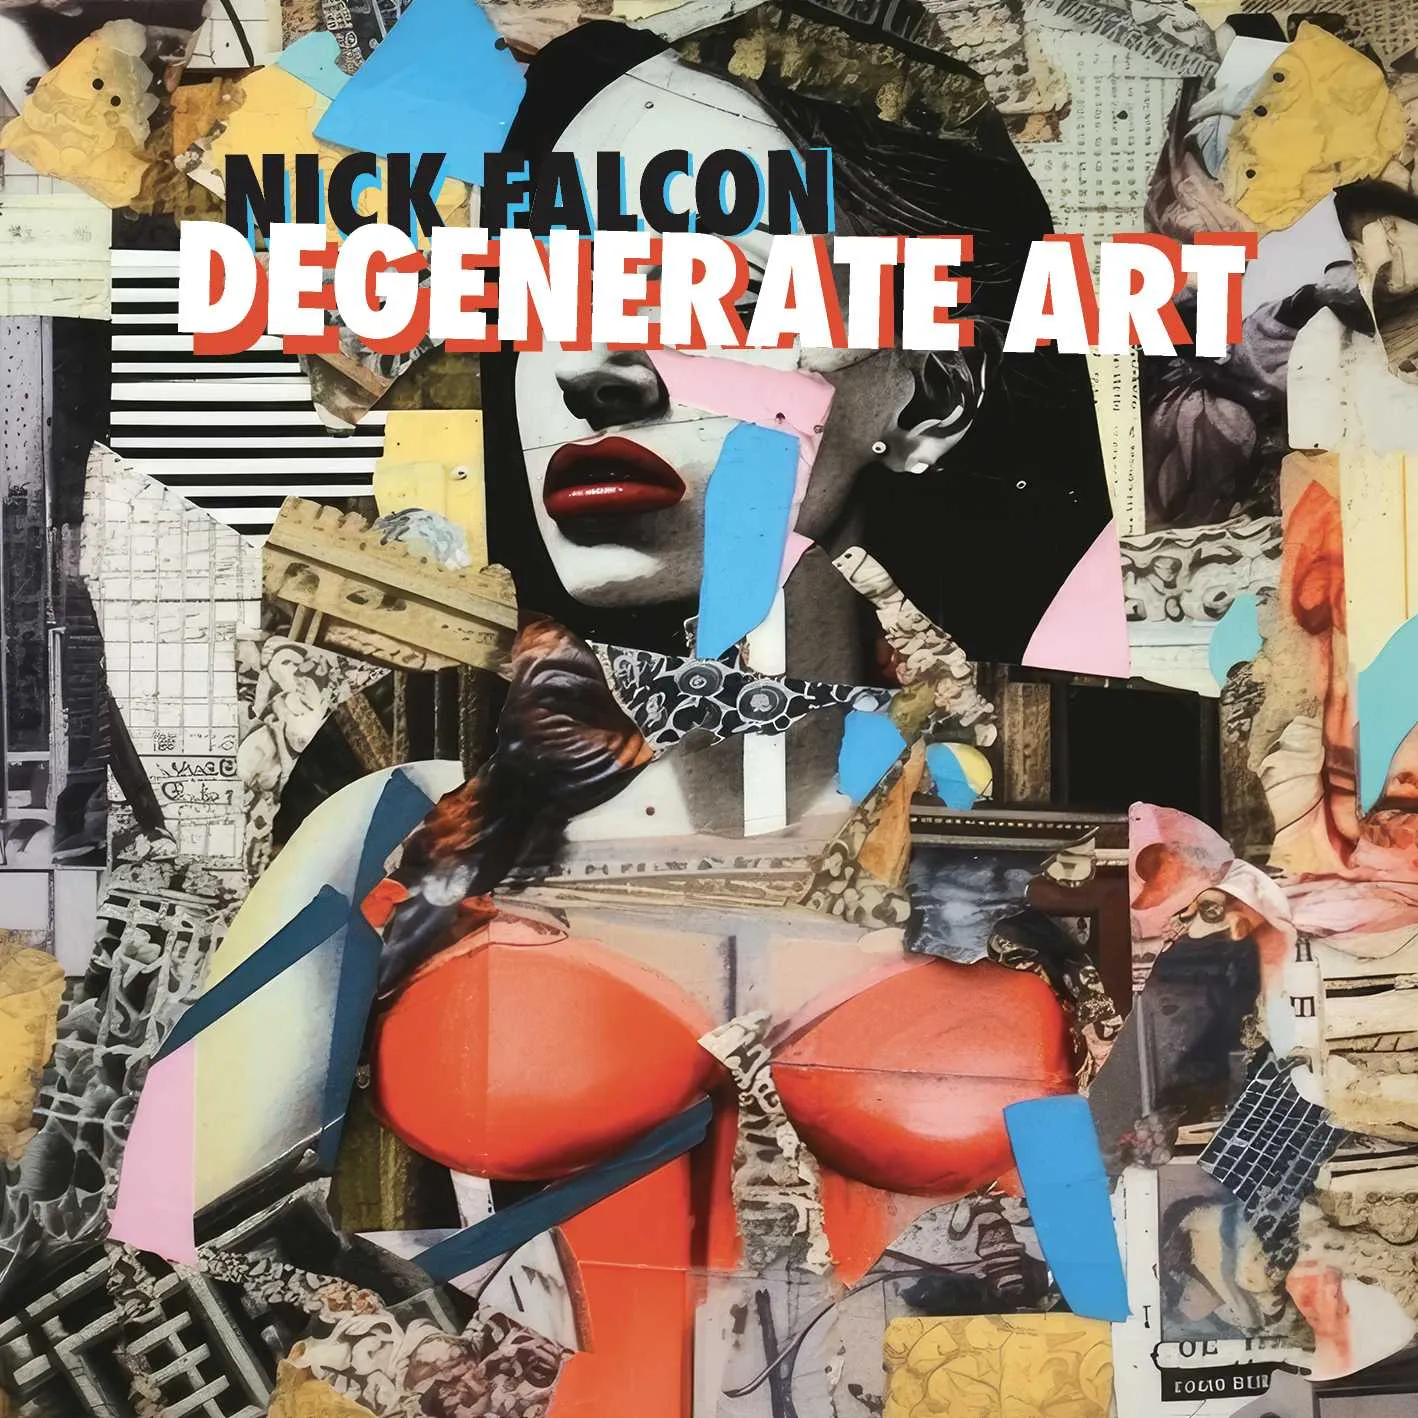 Album cover for “Degenerate Art” by Nick Falcon